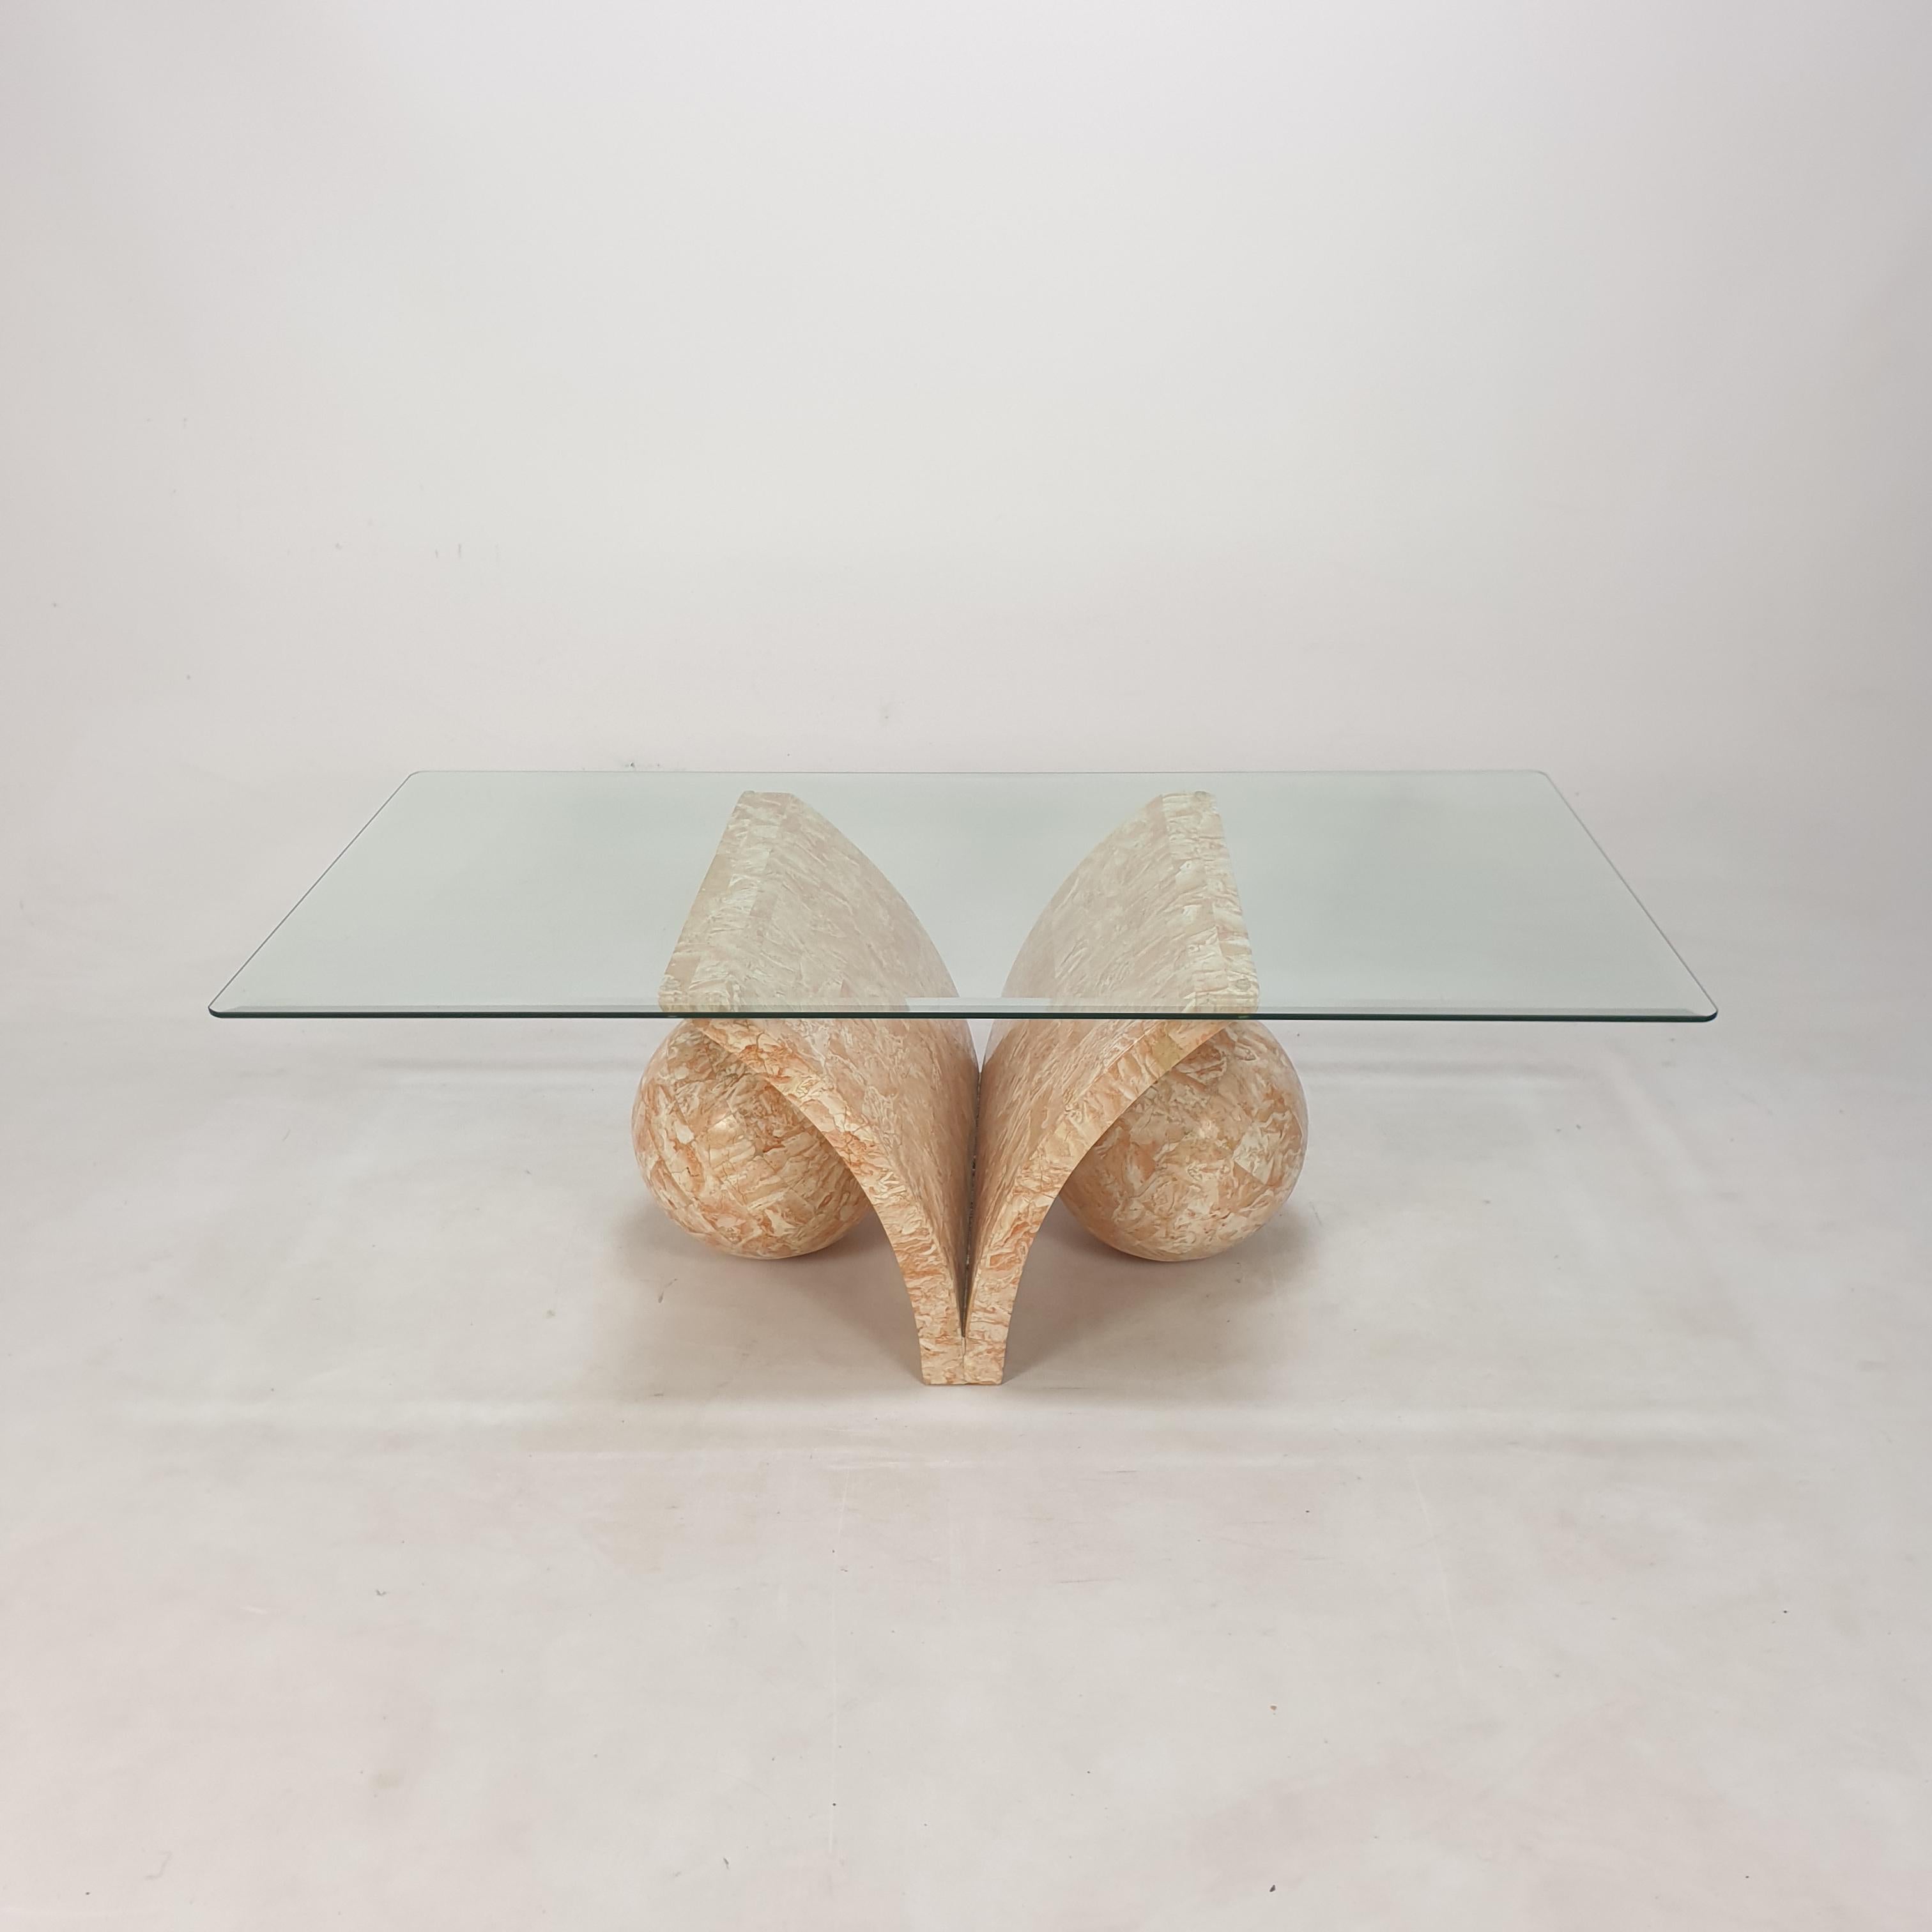 Very rare coffee or side table by Magnussen Ponte, 1980's.

The stunning table base is made of Mactan stone or Fossil Stone.

It has a facetted glass plate.